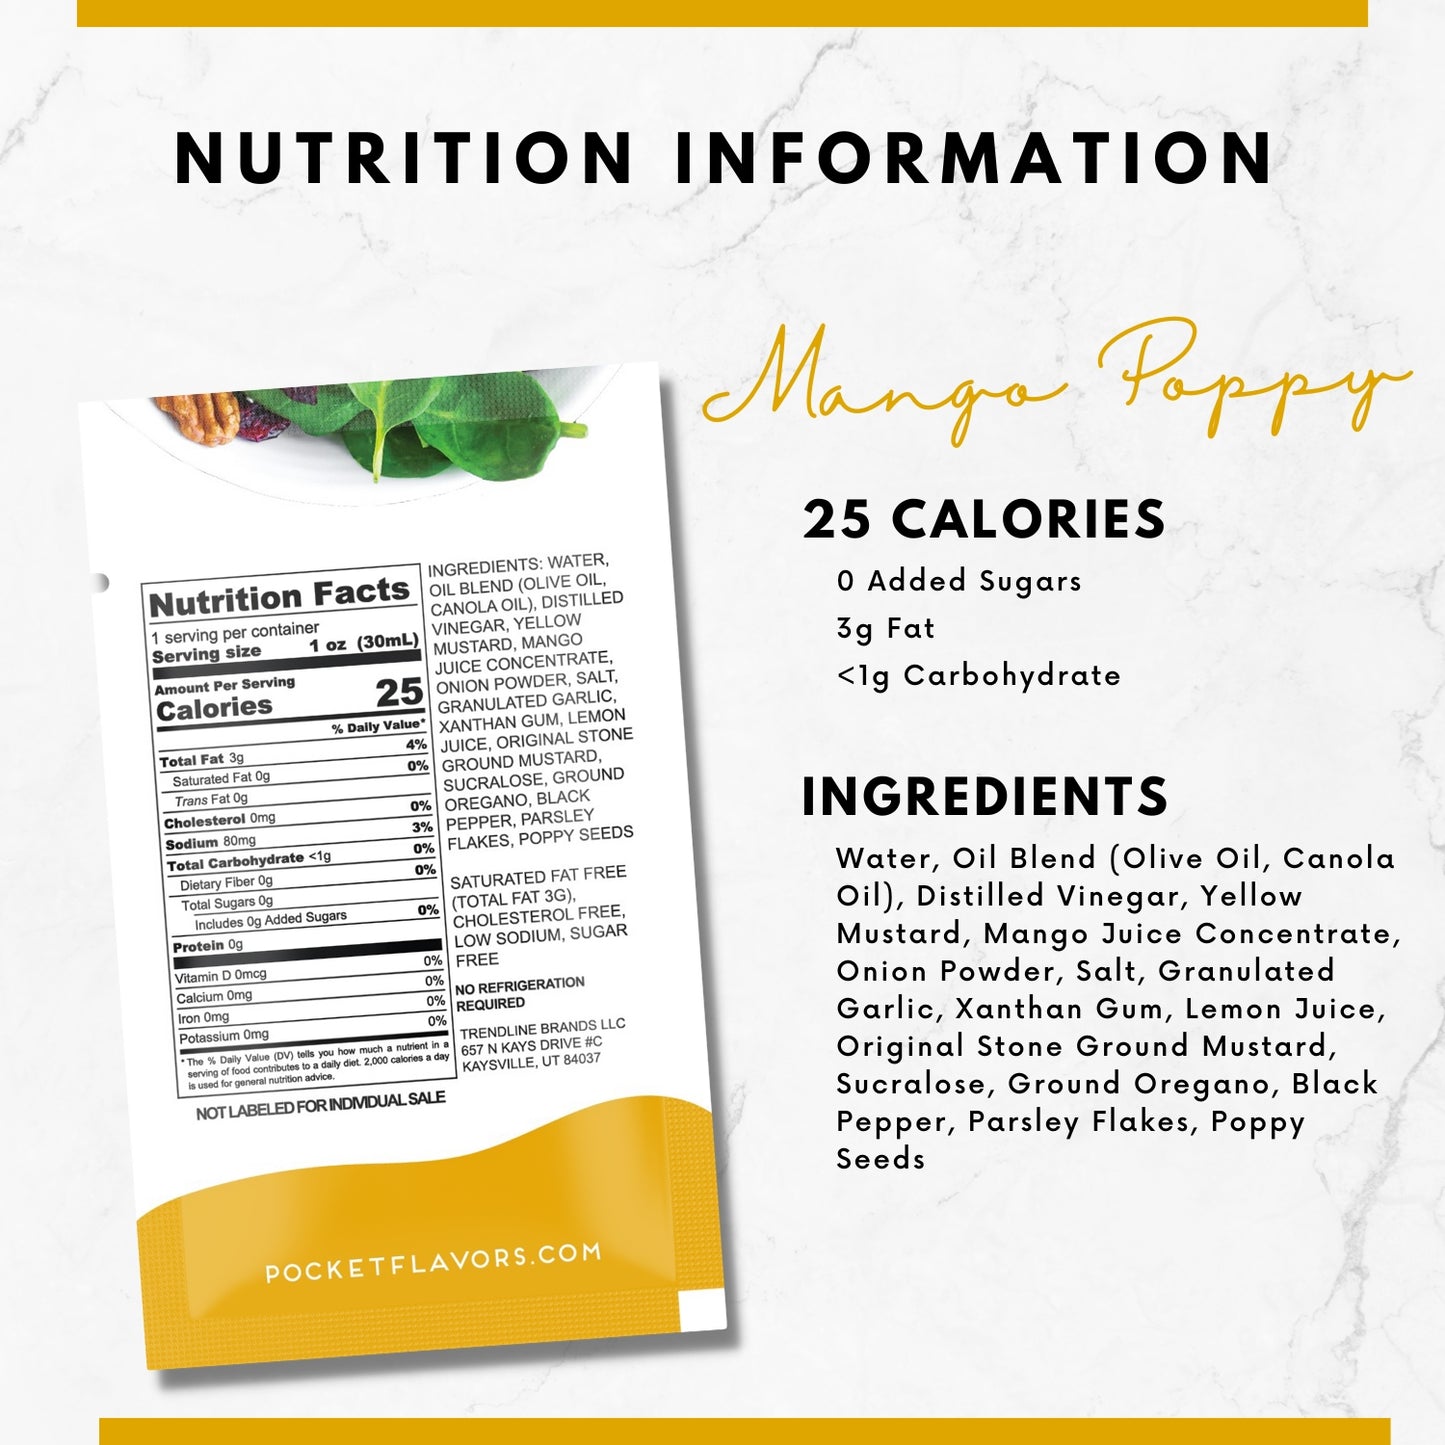 Mango poppy salad dressing nutrition information with nutrition label and ingredients. 